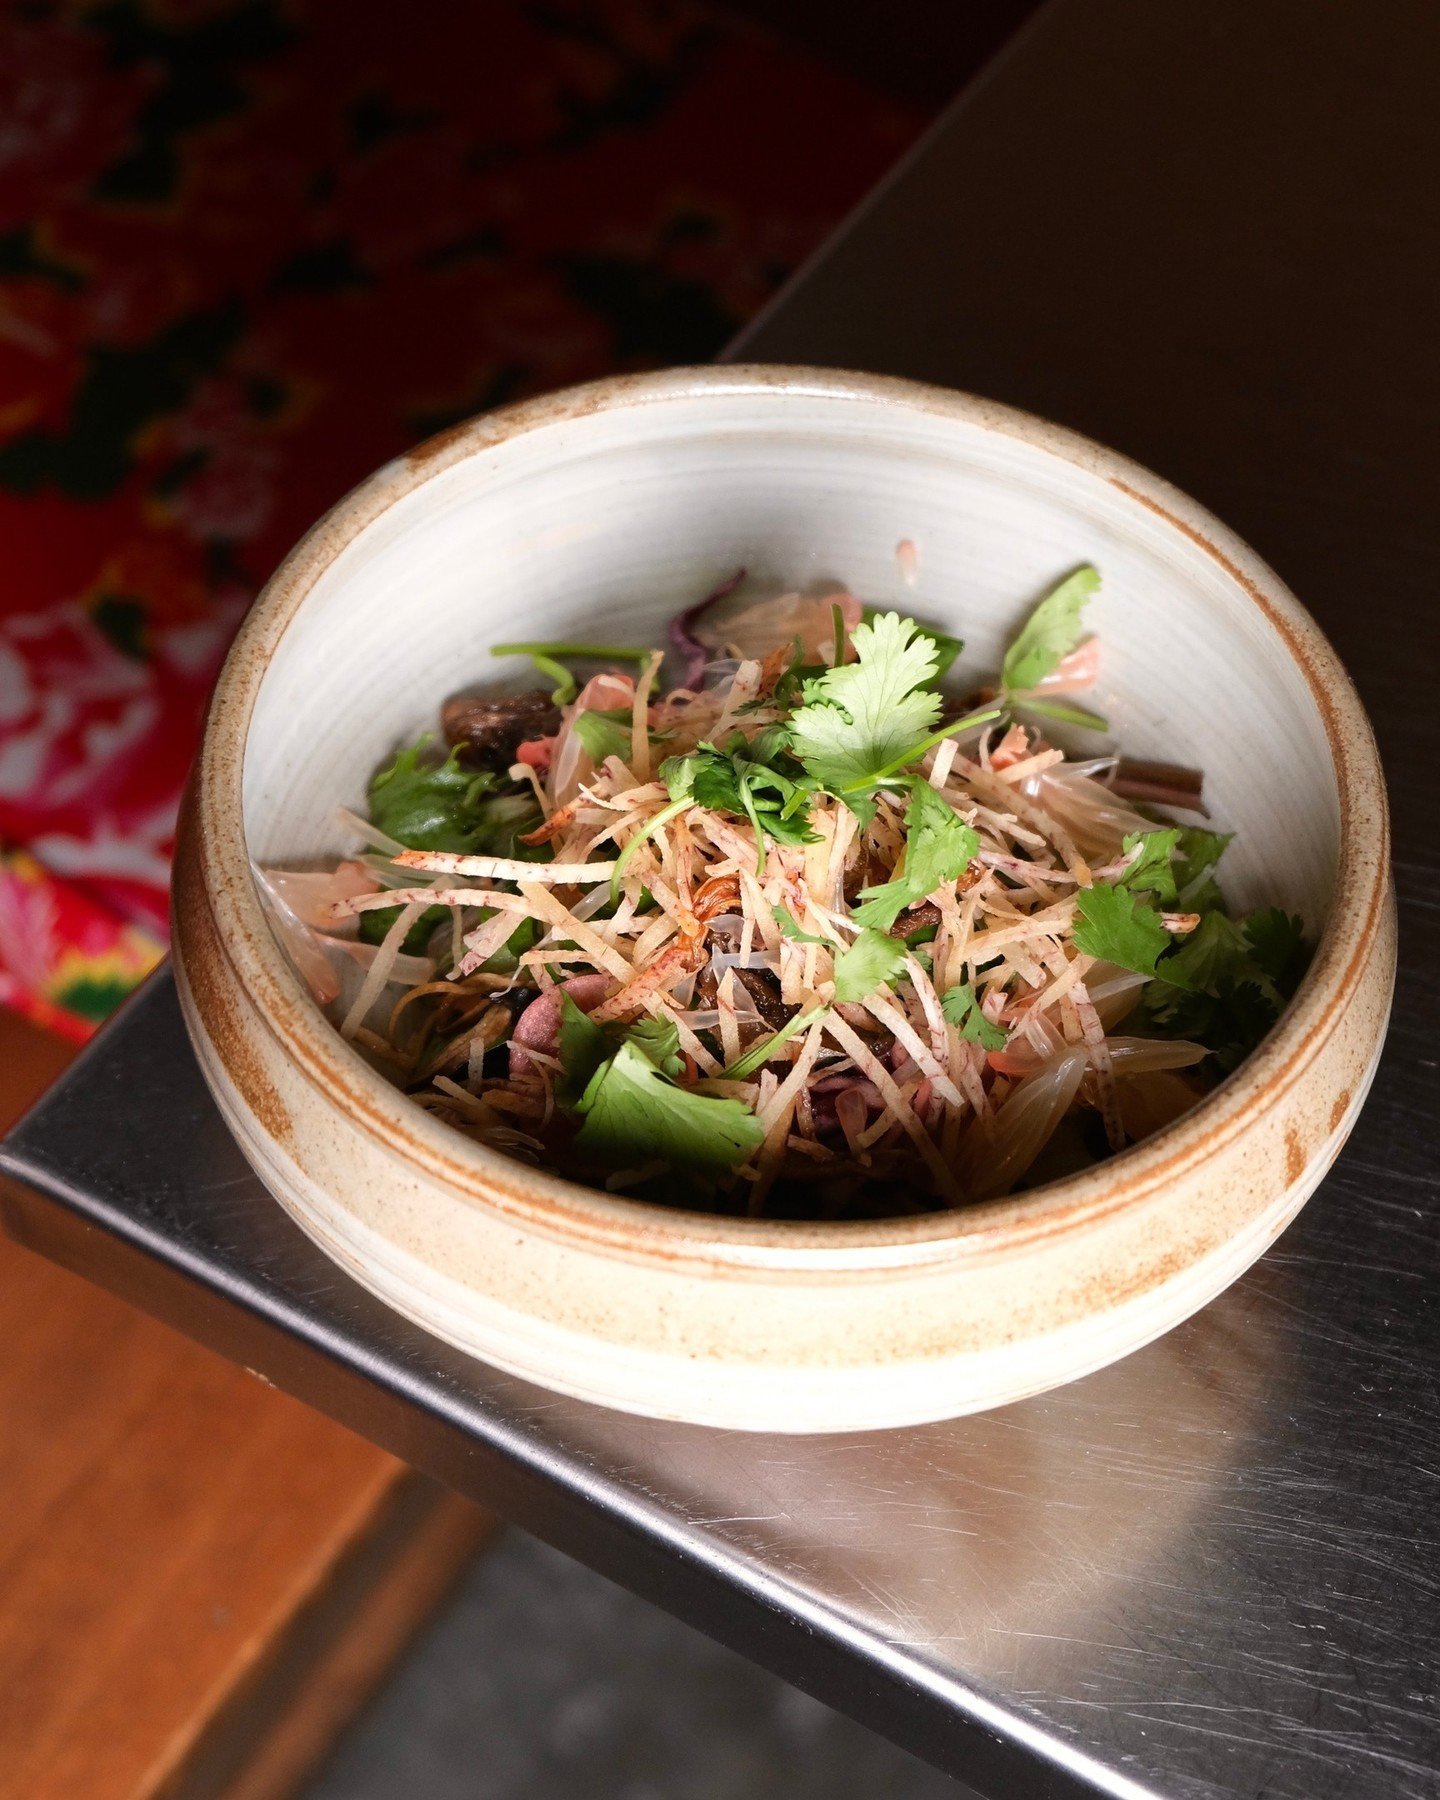 🥗✨Introducing our Spring Salad: Roasted oyster mushrooms &amp; banana blossom, fresh mixed baby lettuce and crispy matchstick taro, all dressed in a zesty lychee ginger vinaigrette. 

Part of our seasonal fresh sheet and available for dine in only.